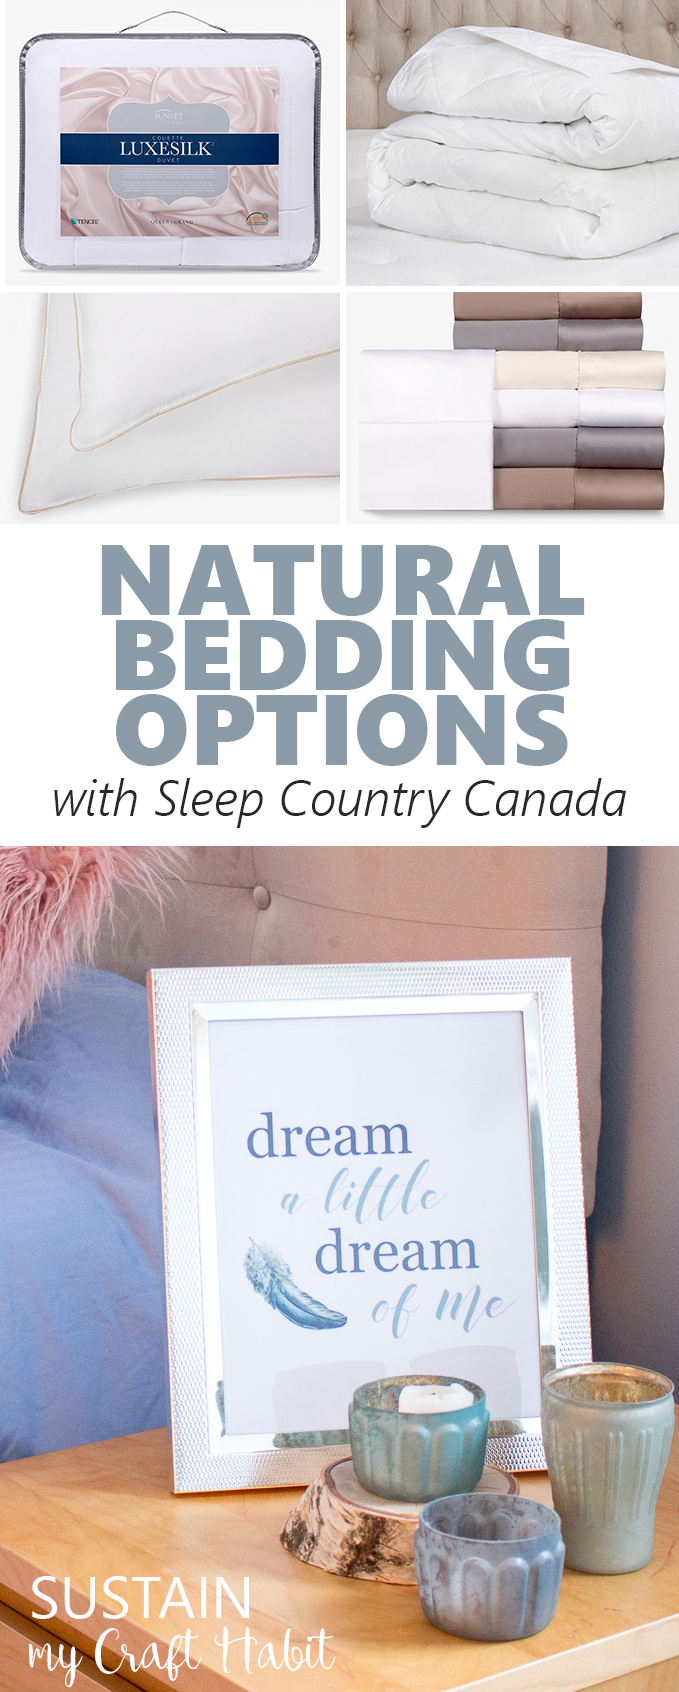 Natural bedding options for your bedroom and home